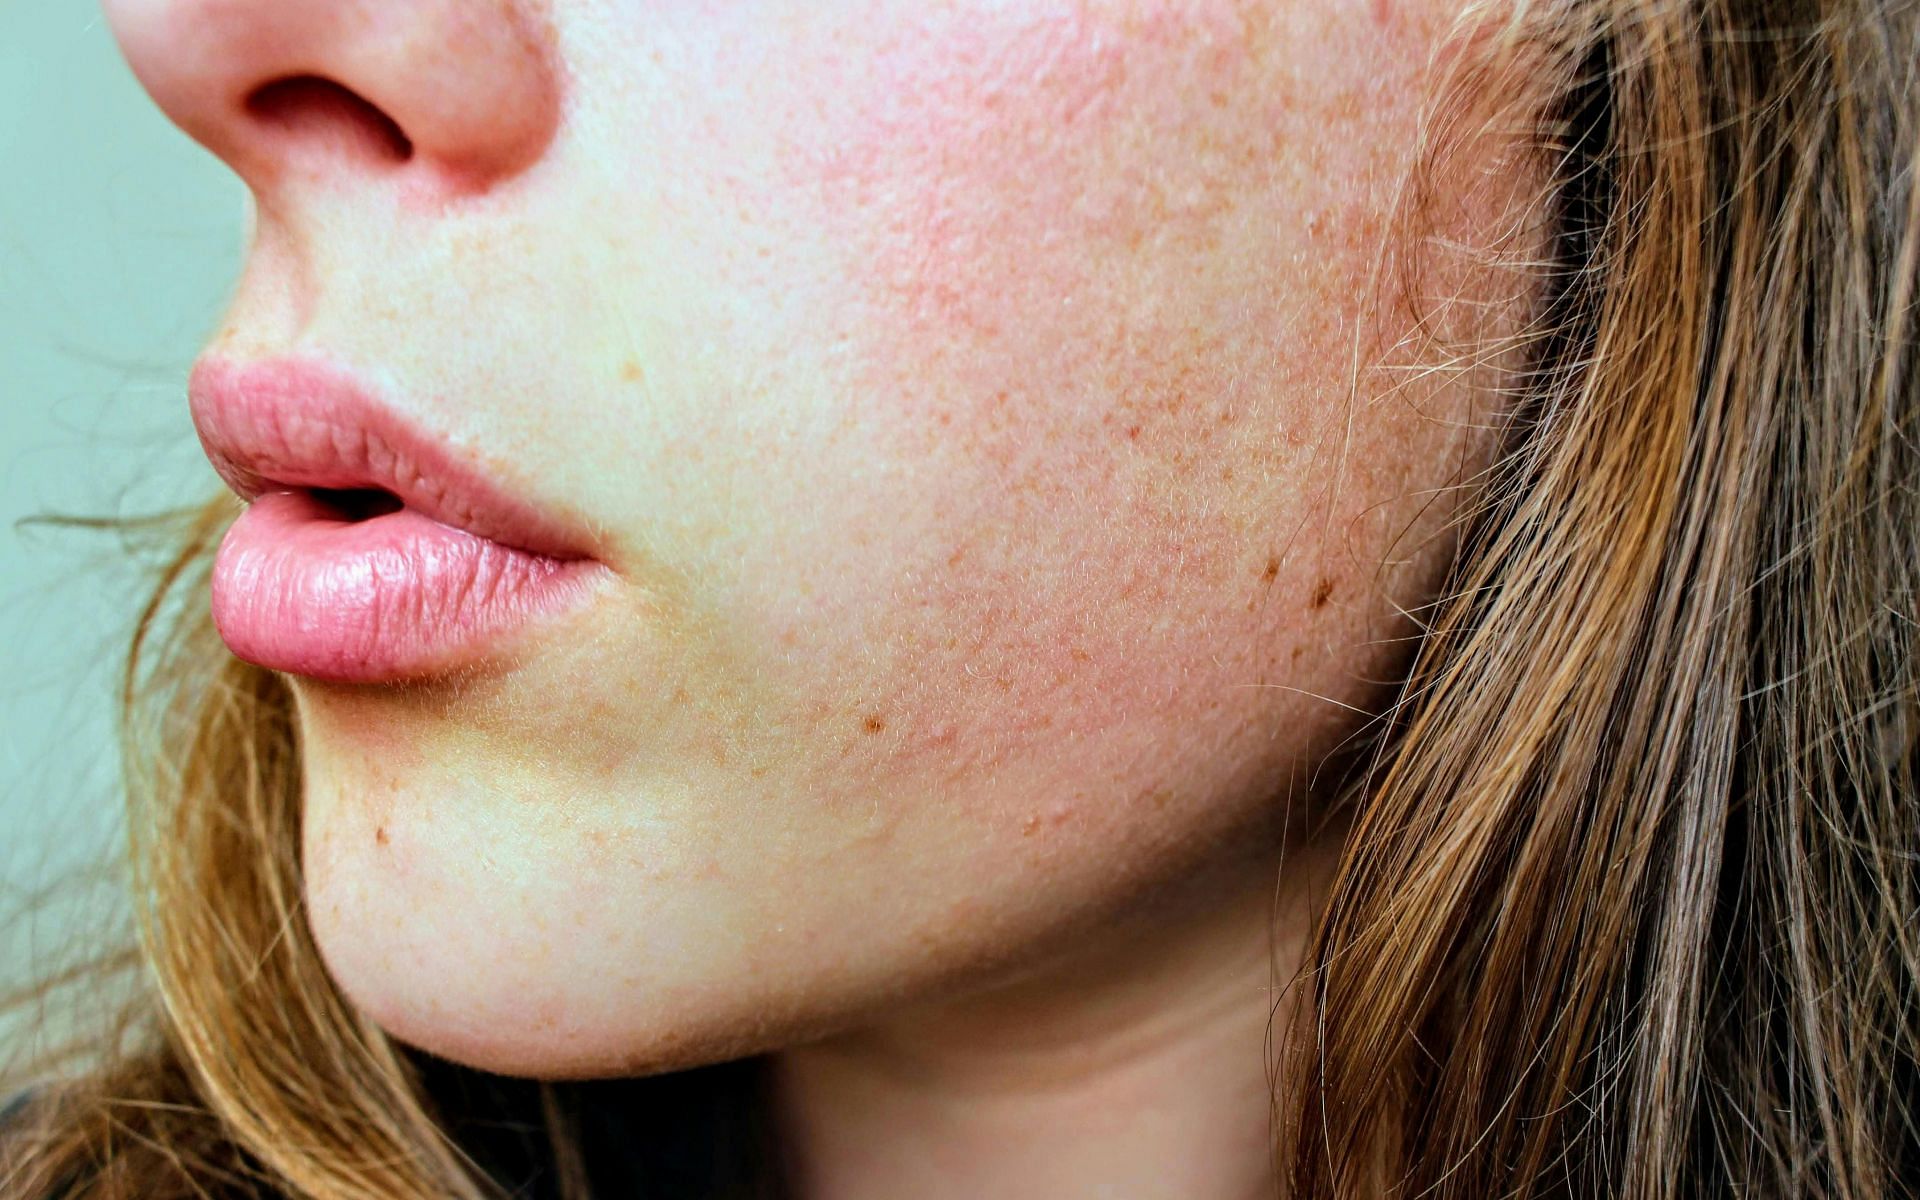 ways to increase collagen (image sourced via Pexels / Photo by jenna)